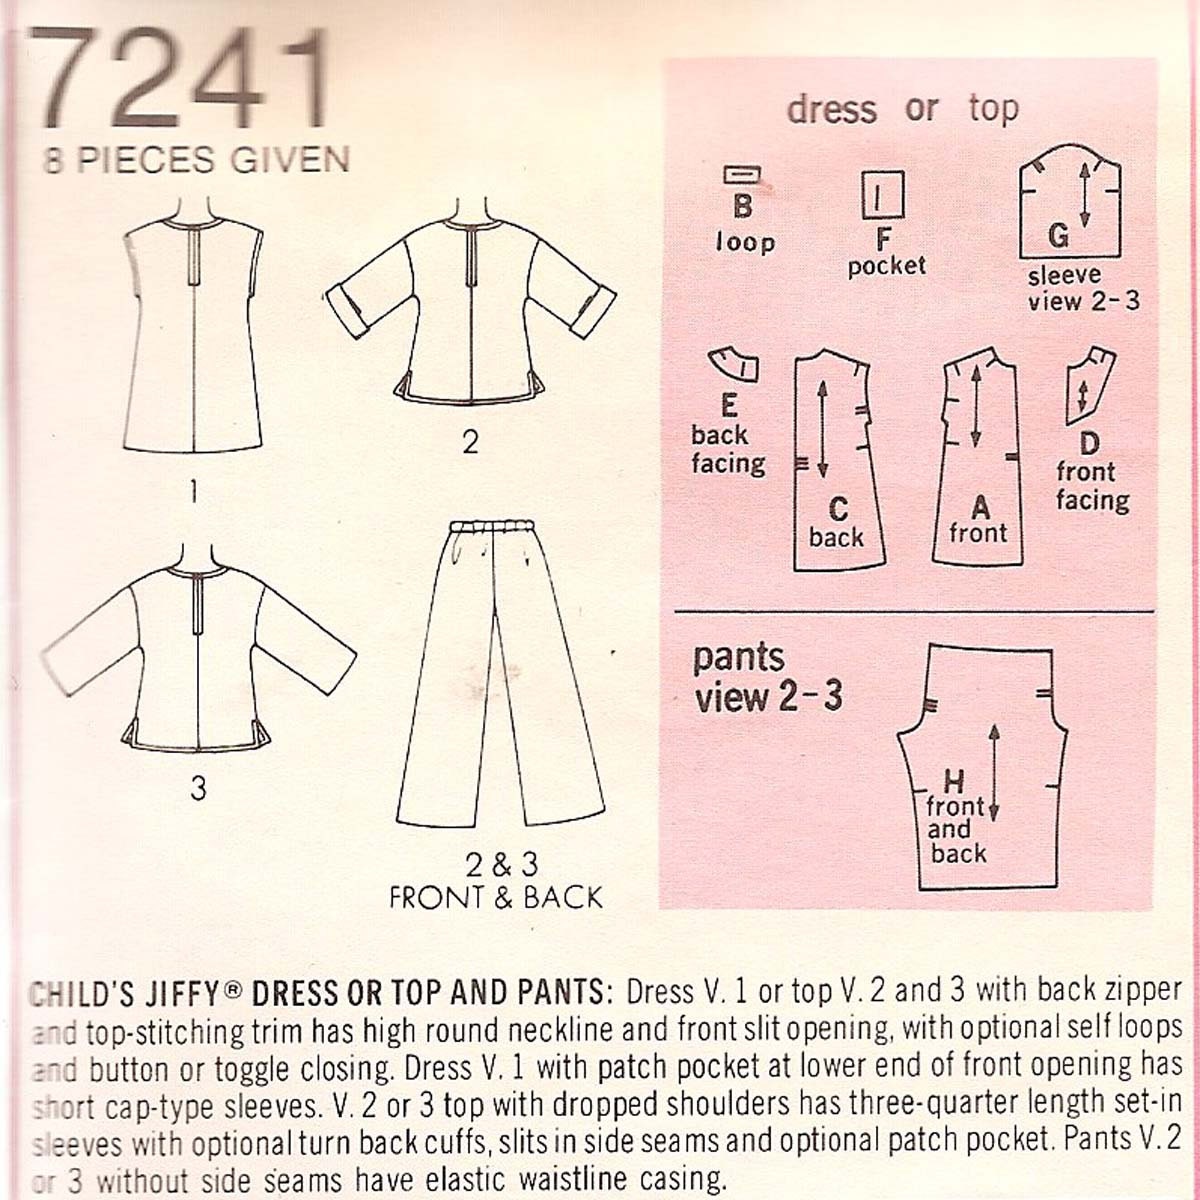 1975 Simplicity Childs Jiffy Dress or Top and Pants Pattern - Etsy